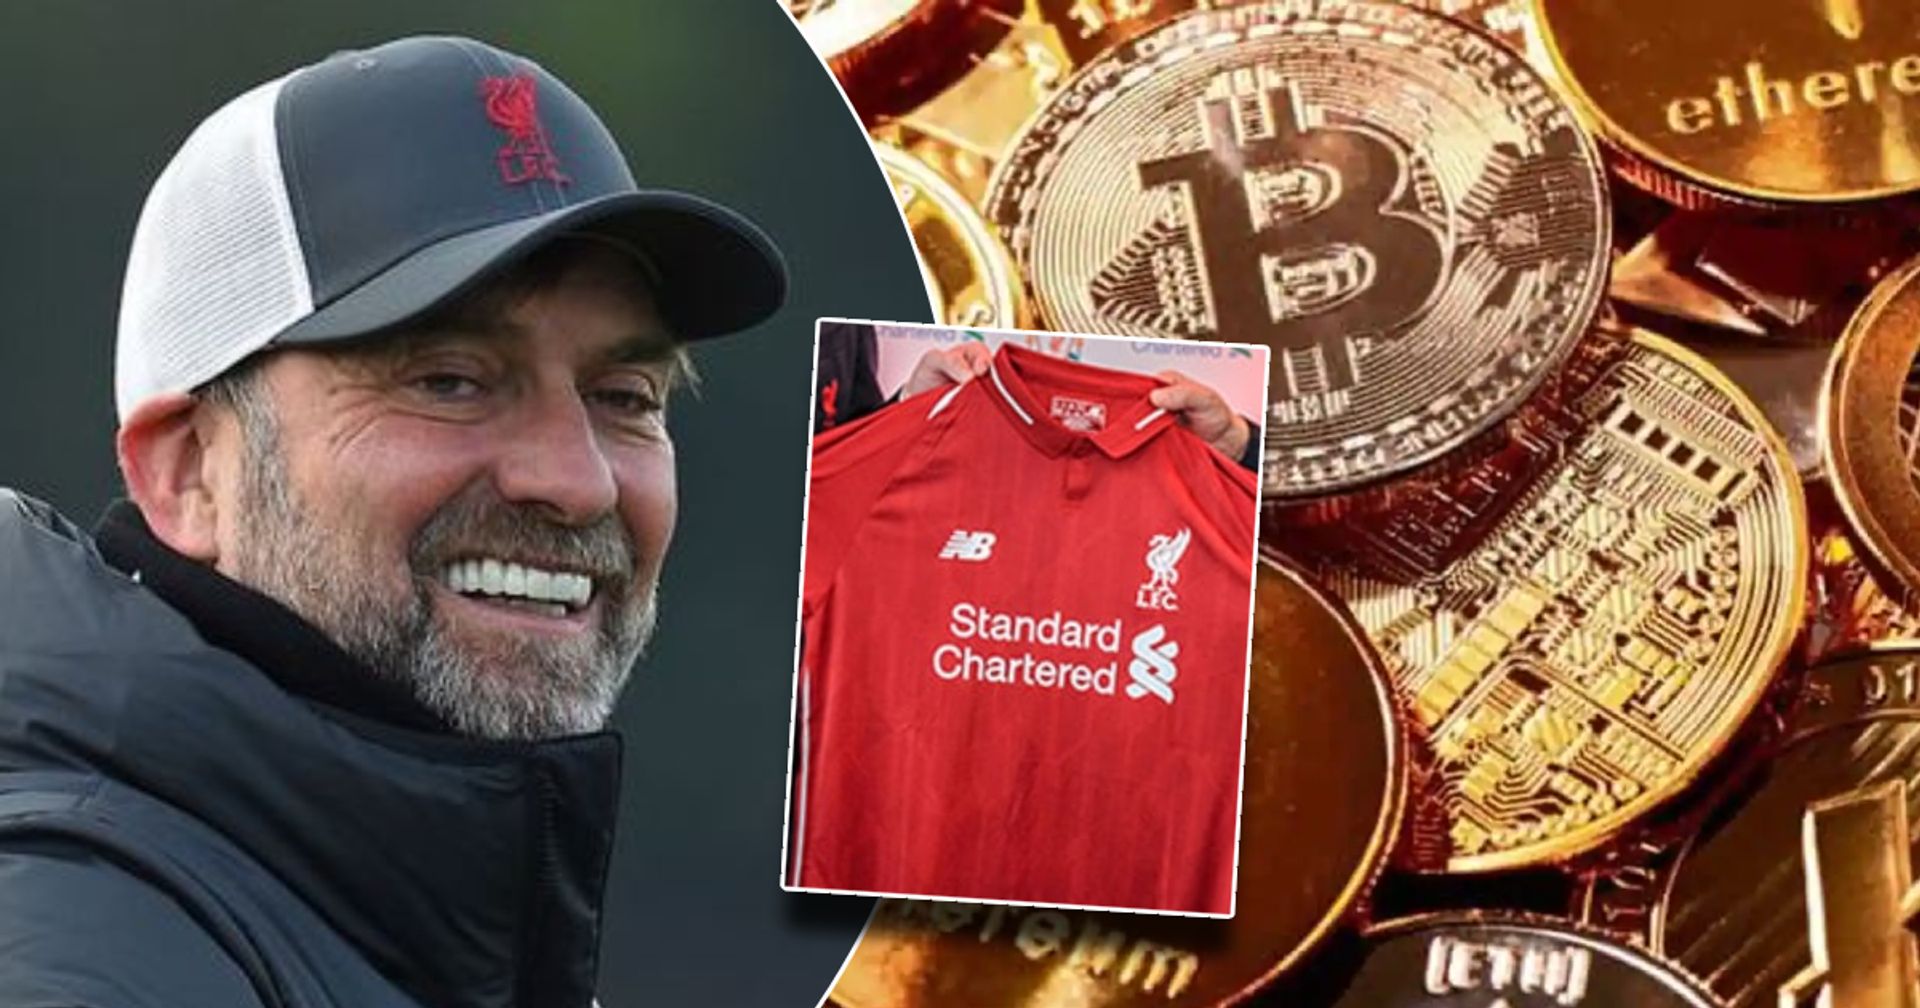 Liverpool to become first Premier League club with cryptocurrency firm as shirt sponsor